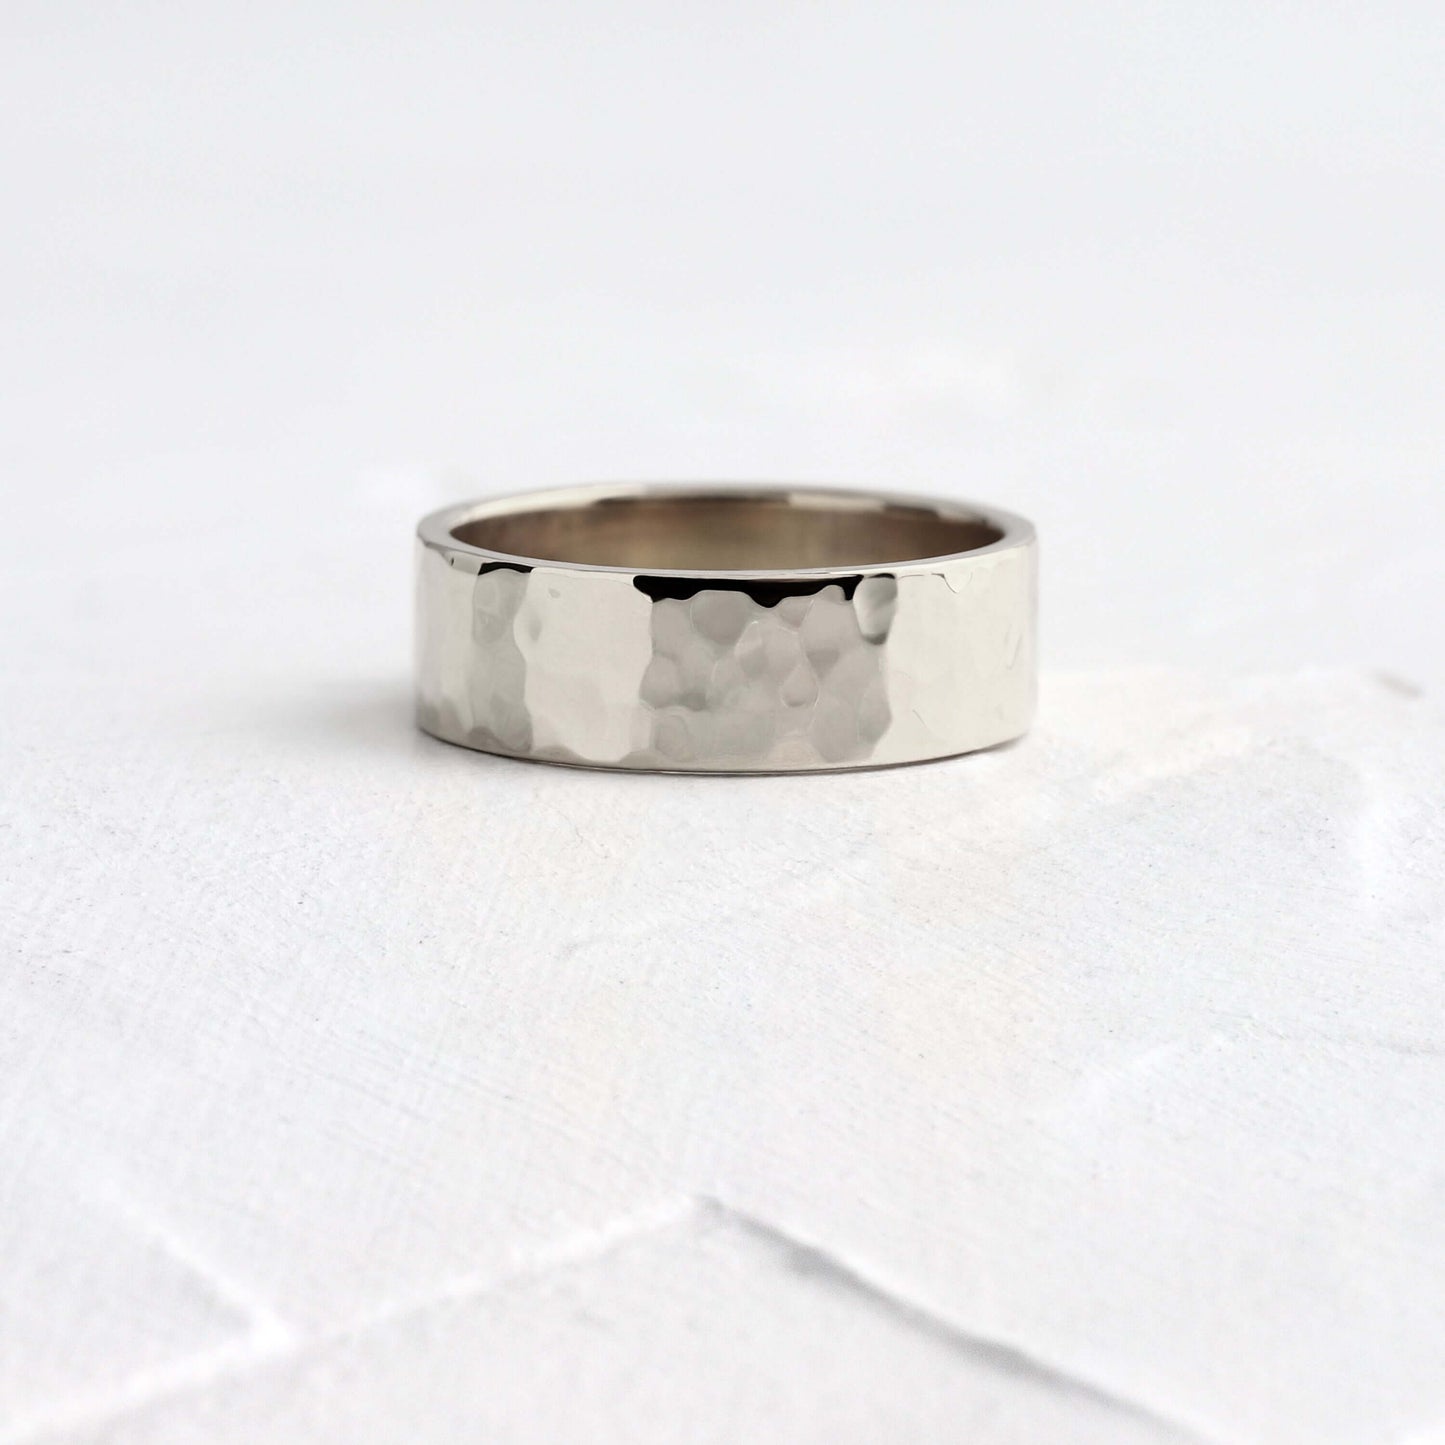 Hammered Band, 5mm, Size 12.5 - In Stock